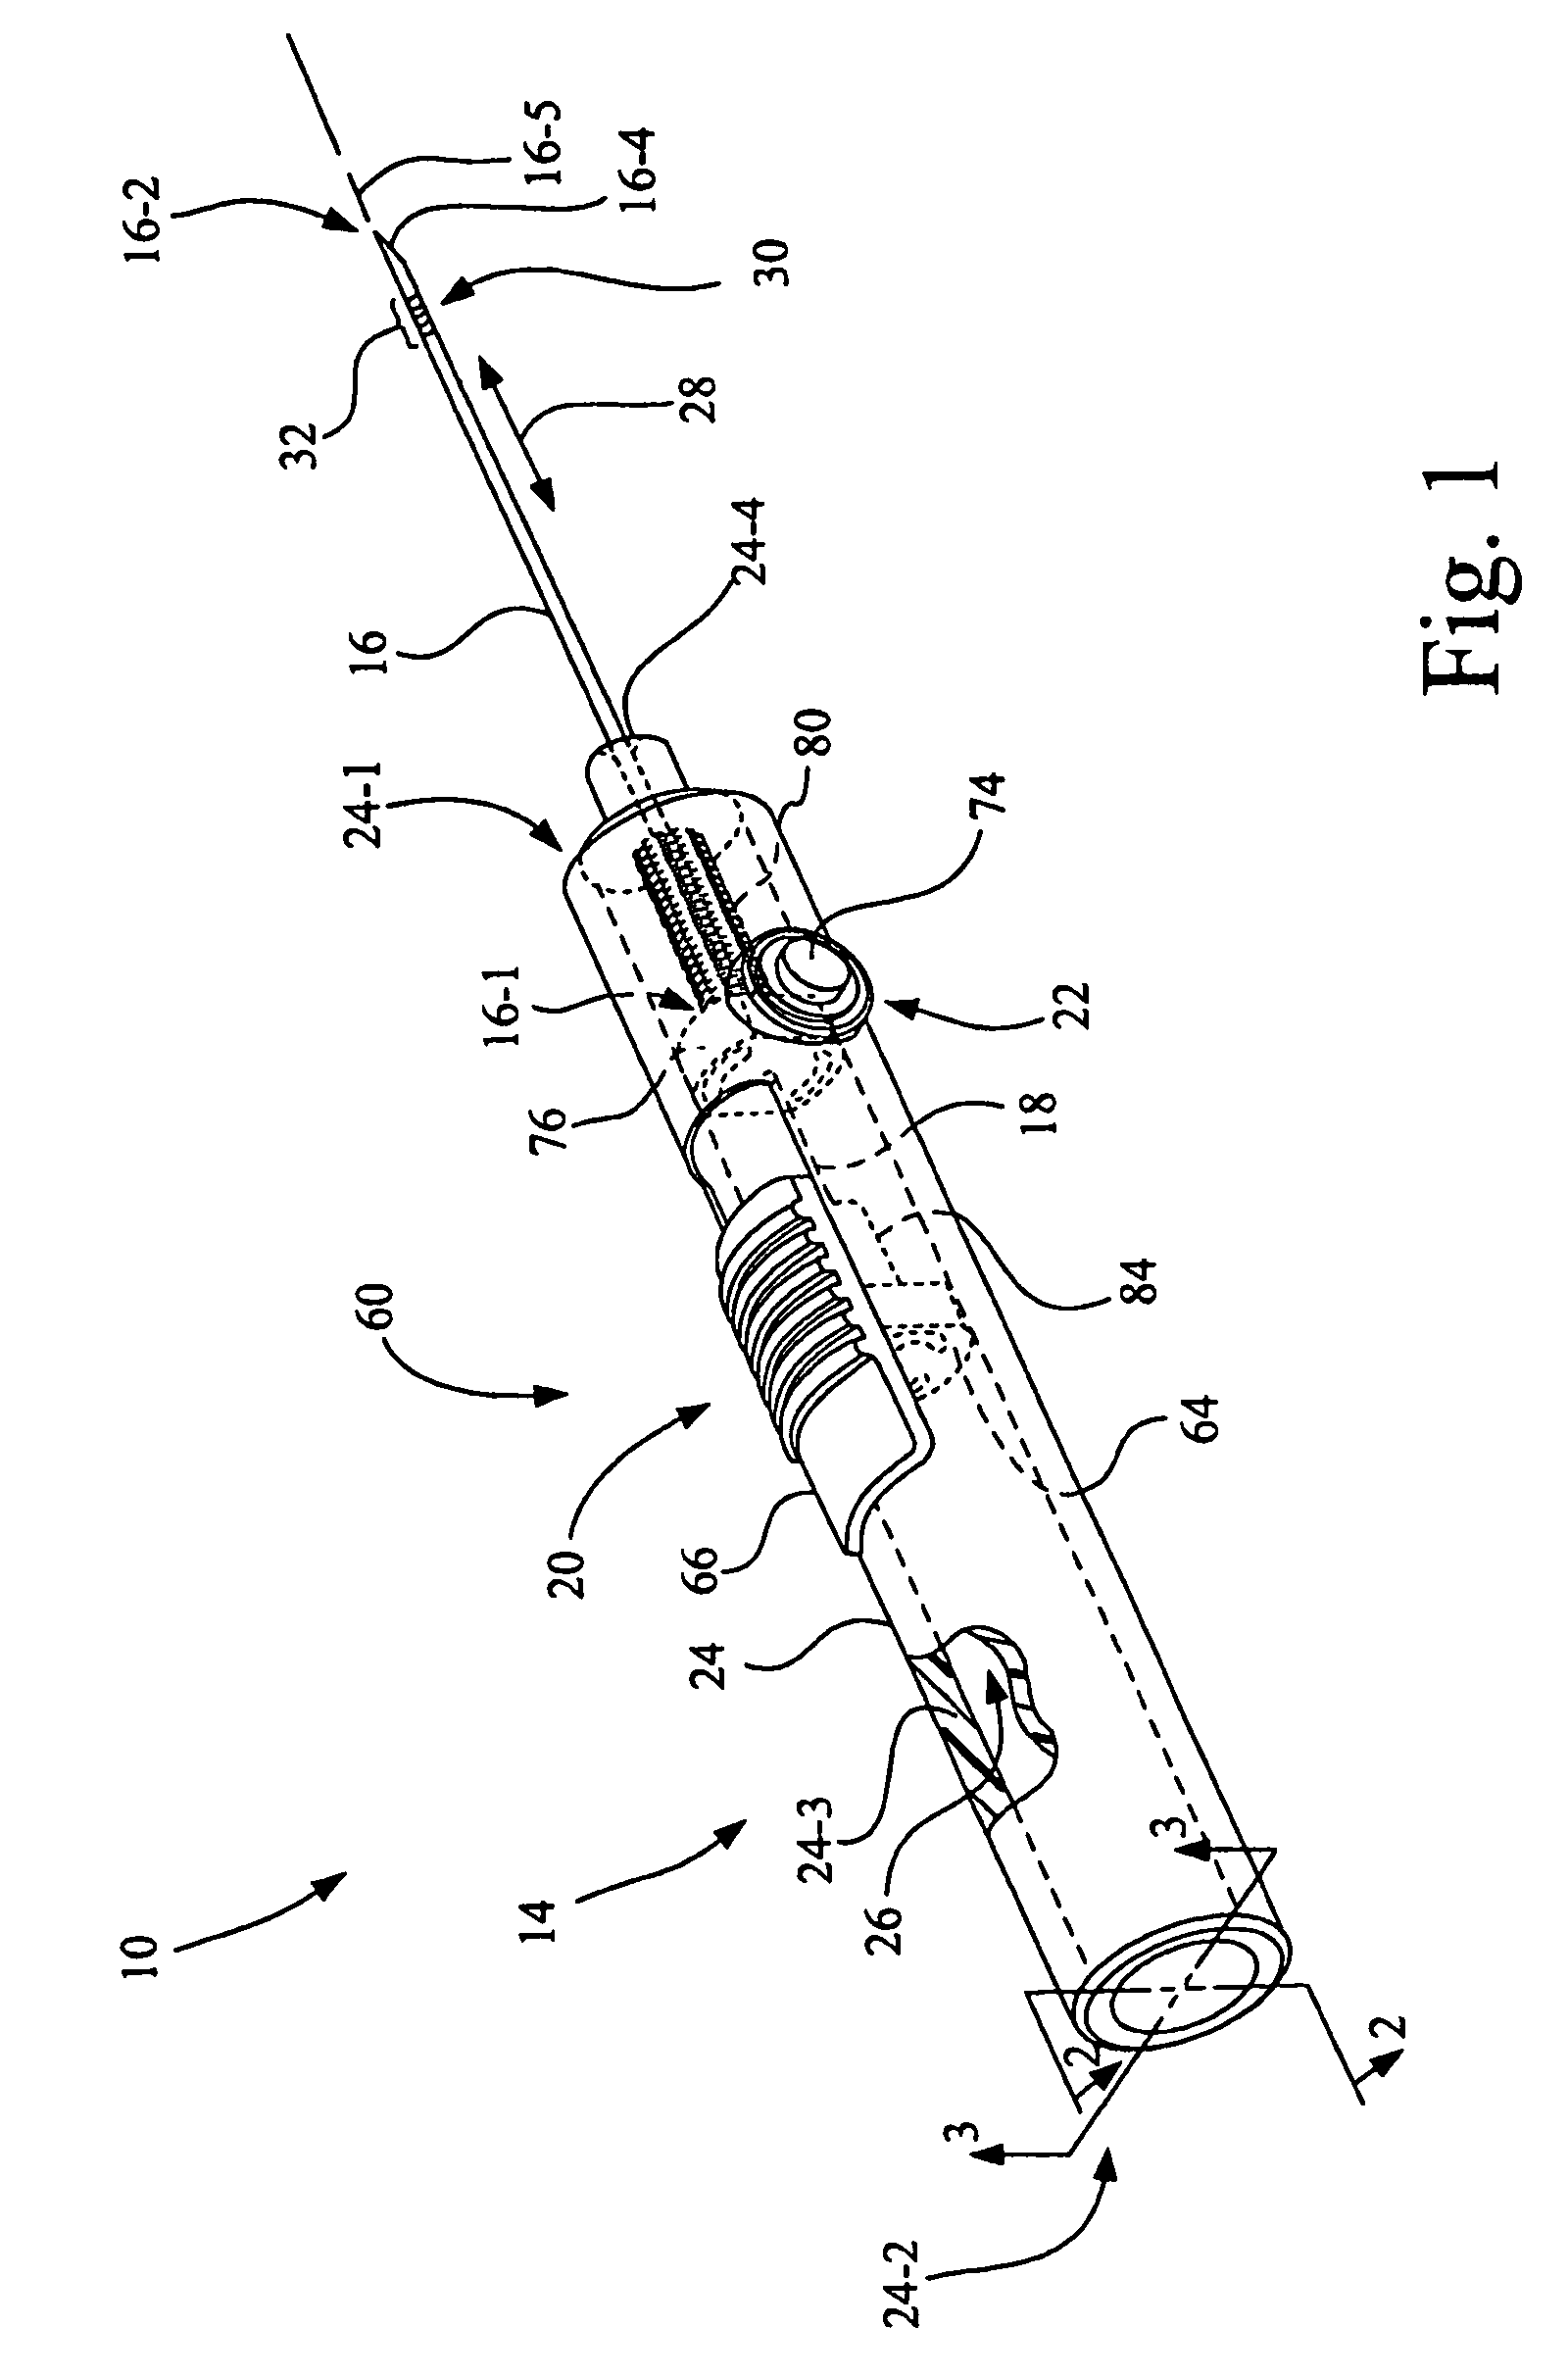 Marker delivery device for tissue marker placement